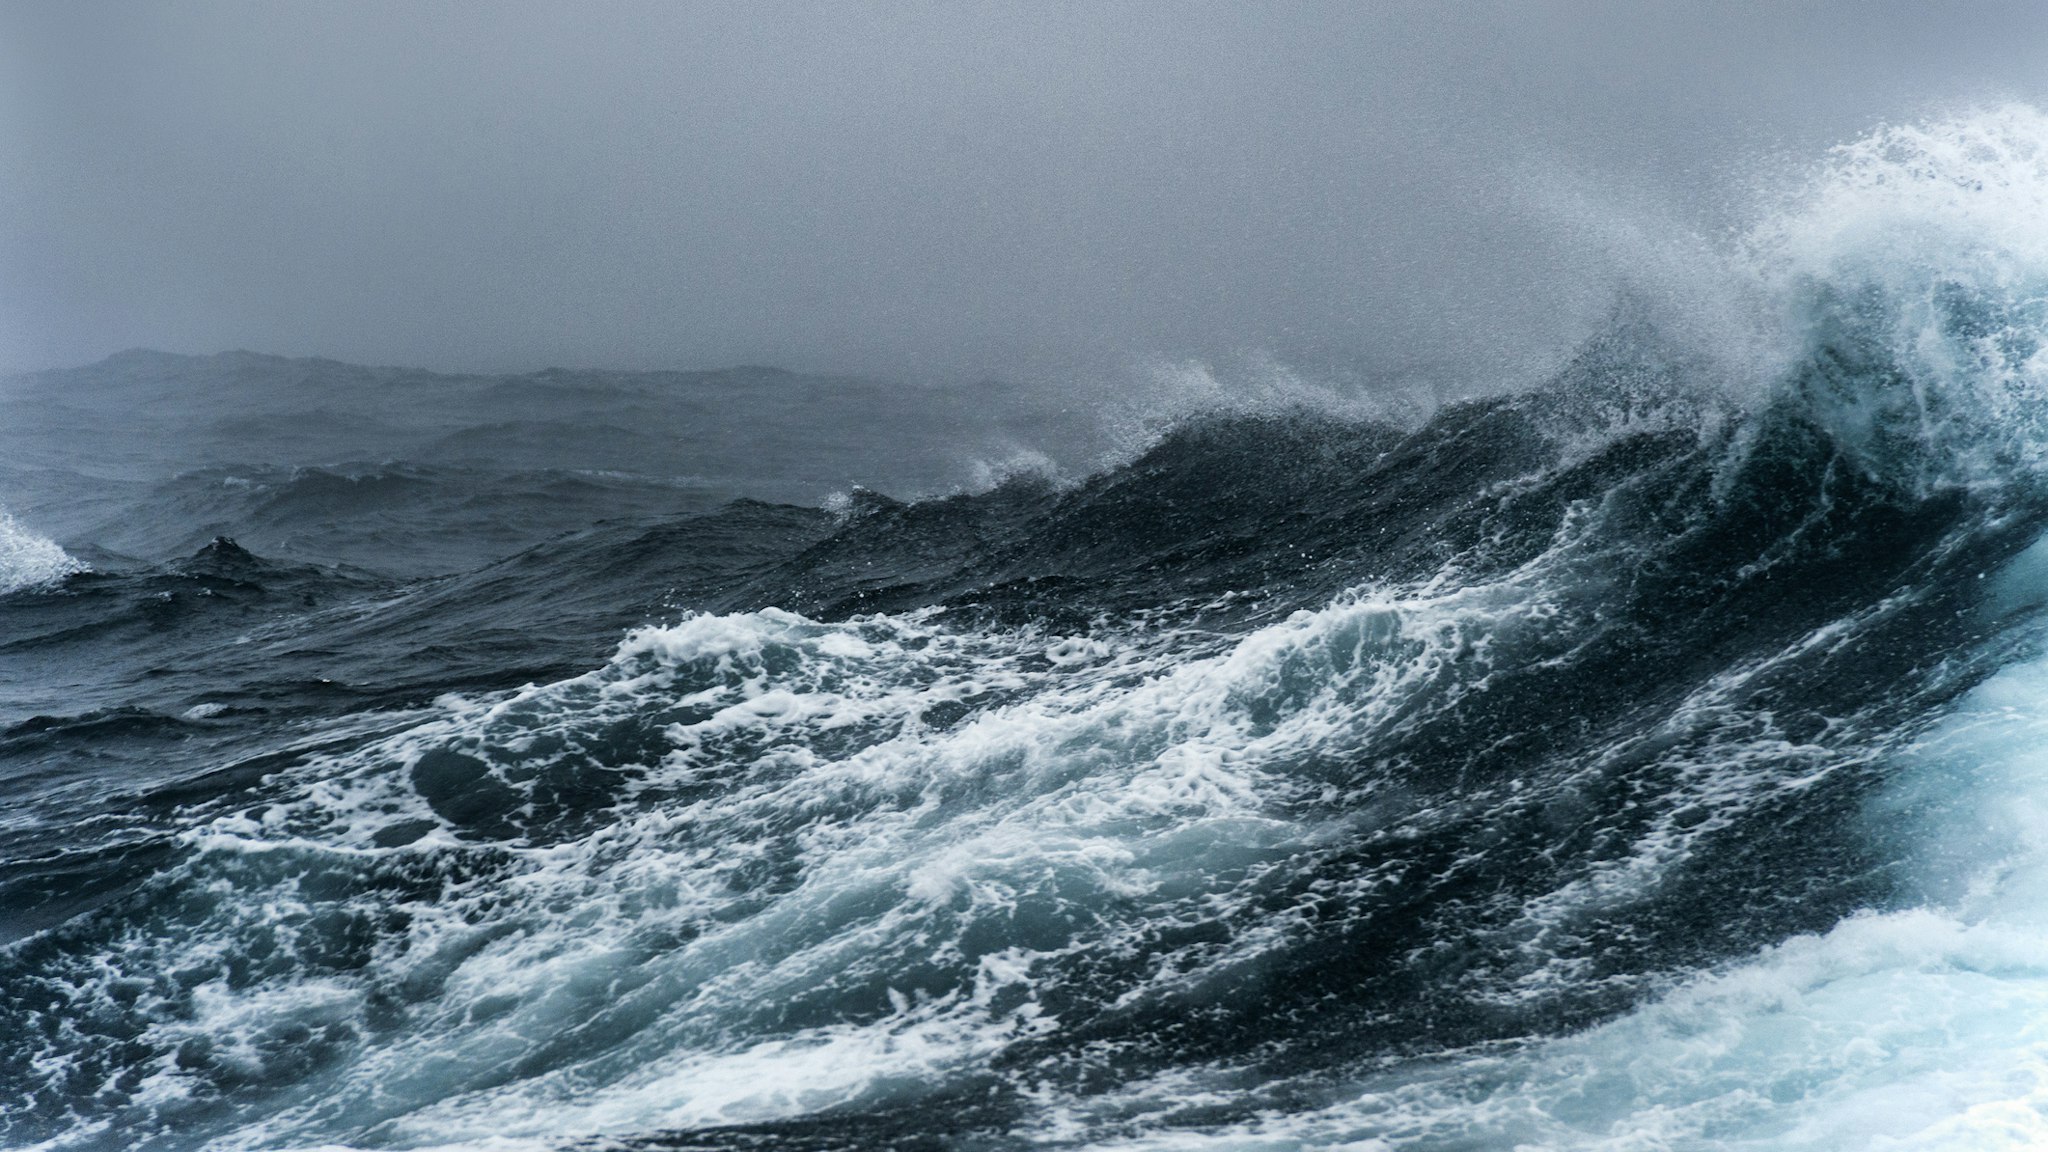 Breaking wave on a rough sea against overcast sky, Southern Ocean.